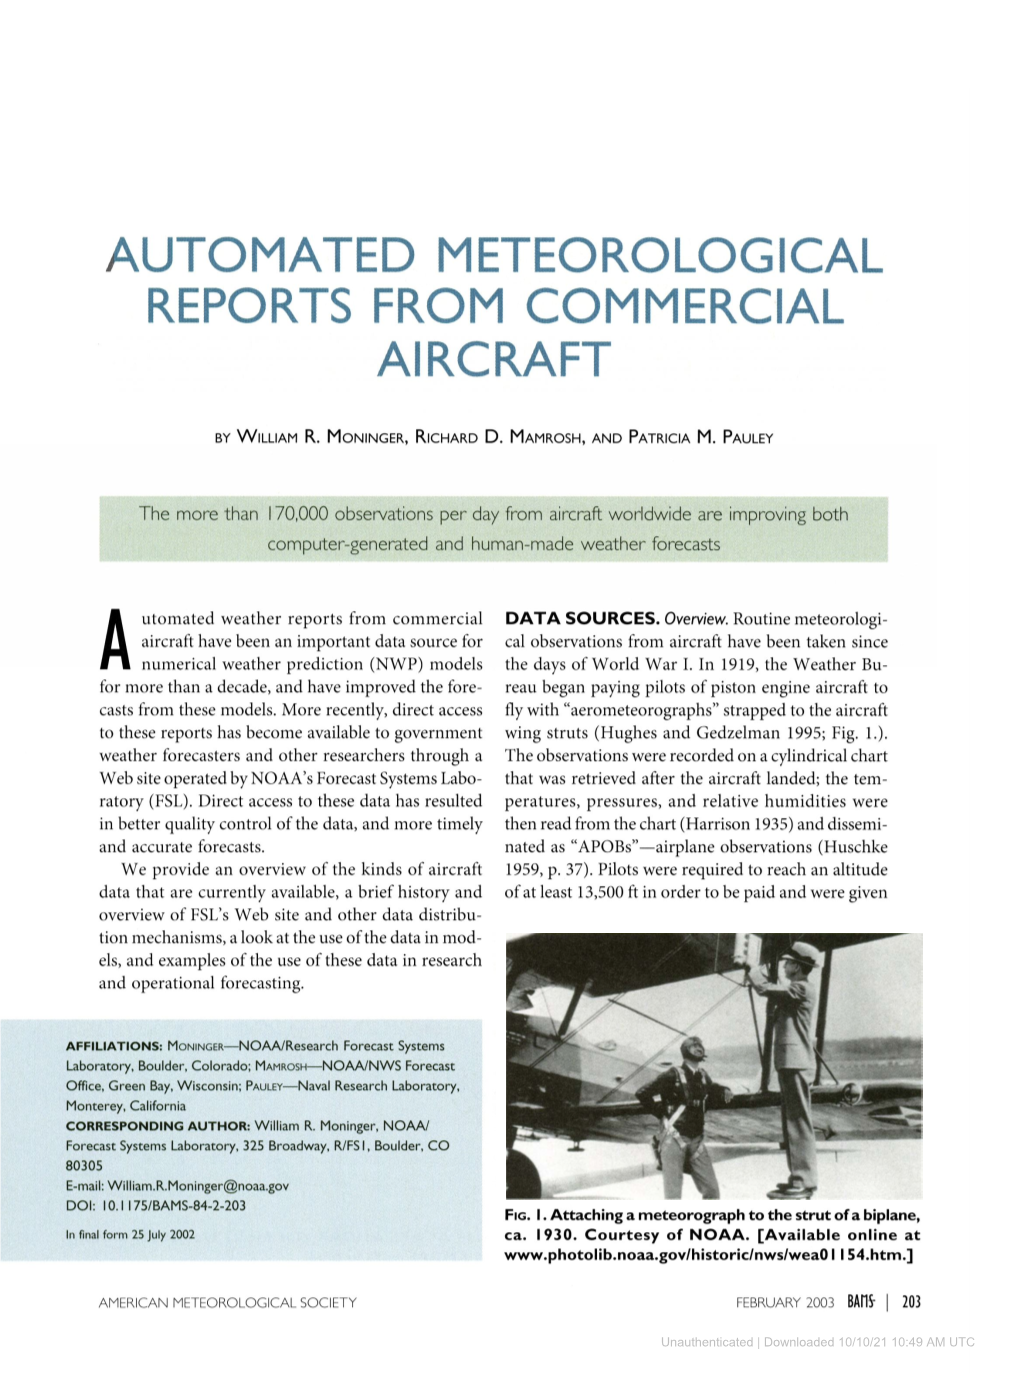 Automated Meteorological Reports from Commercial Aircraft